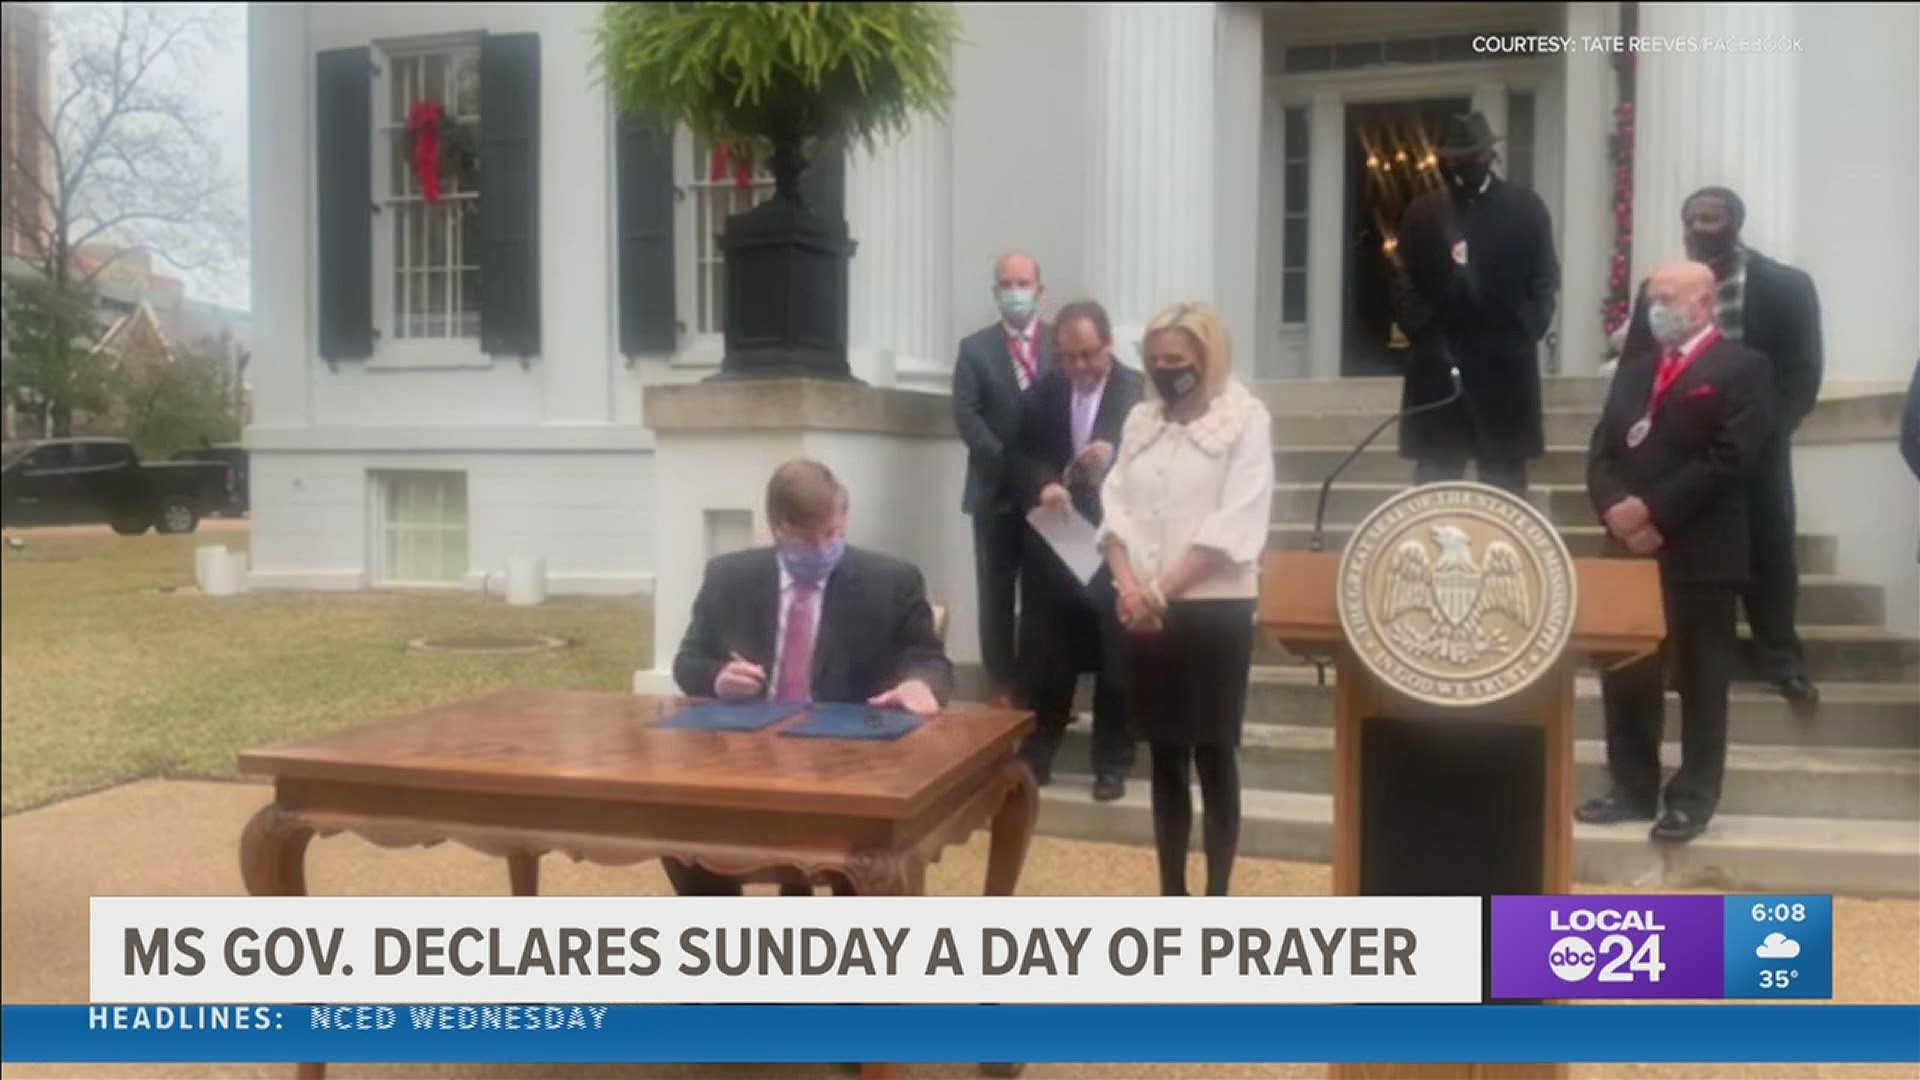 "Today, I am signing a proclamation to declare a Day of Prayer, Humility, and Fasting on Sunday, December 20th," Governor Reeves said.